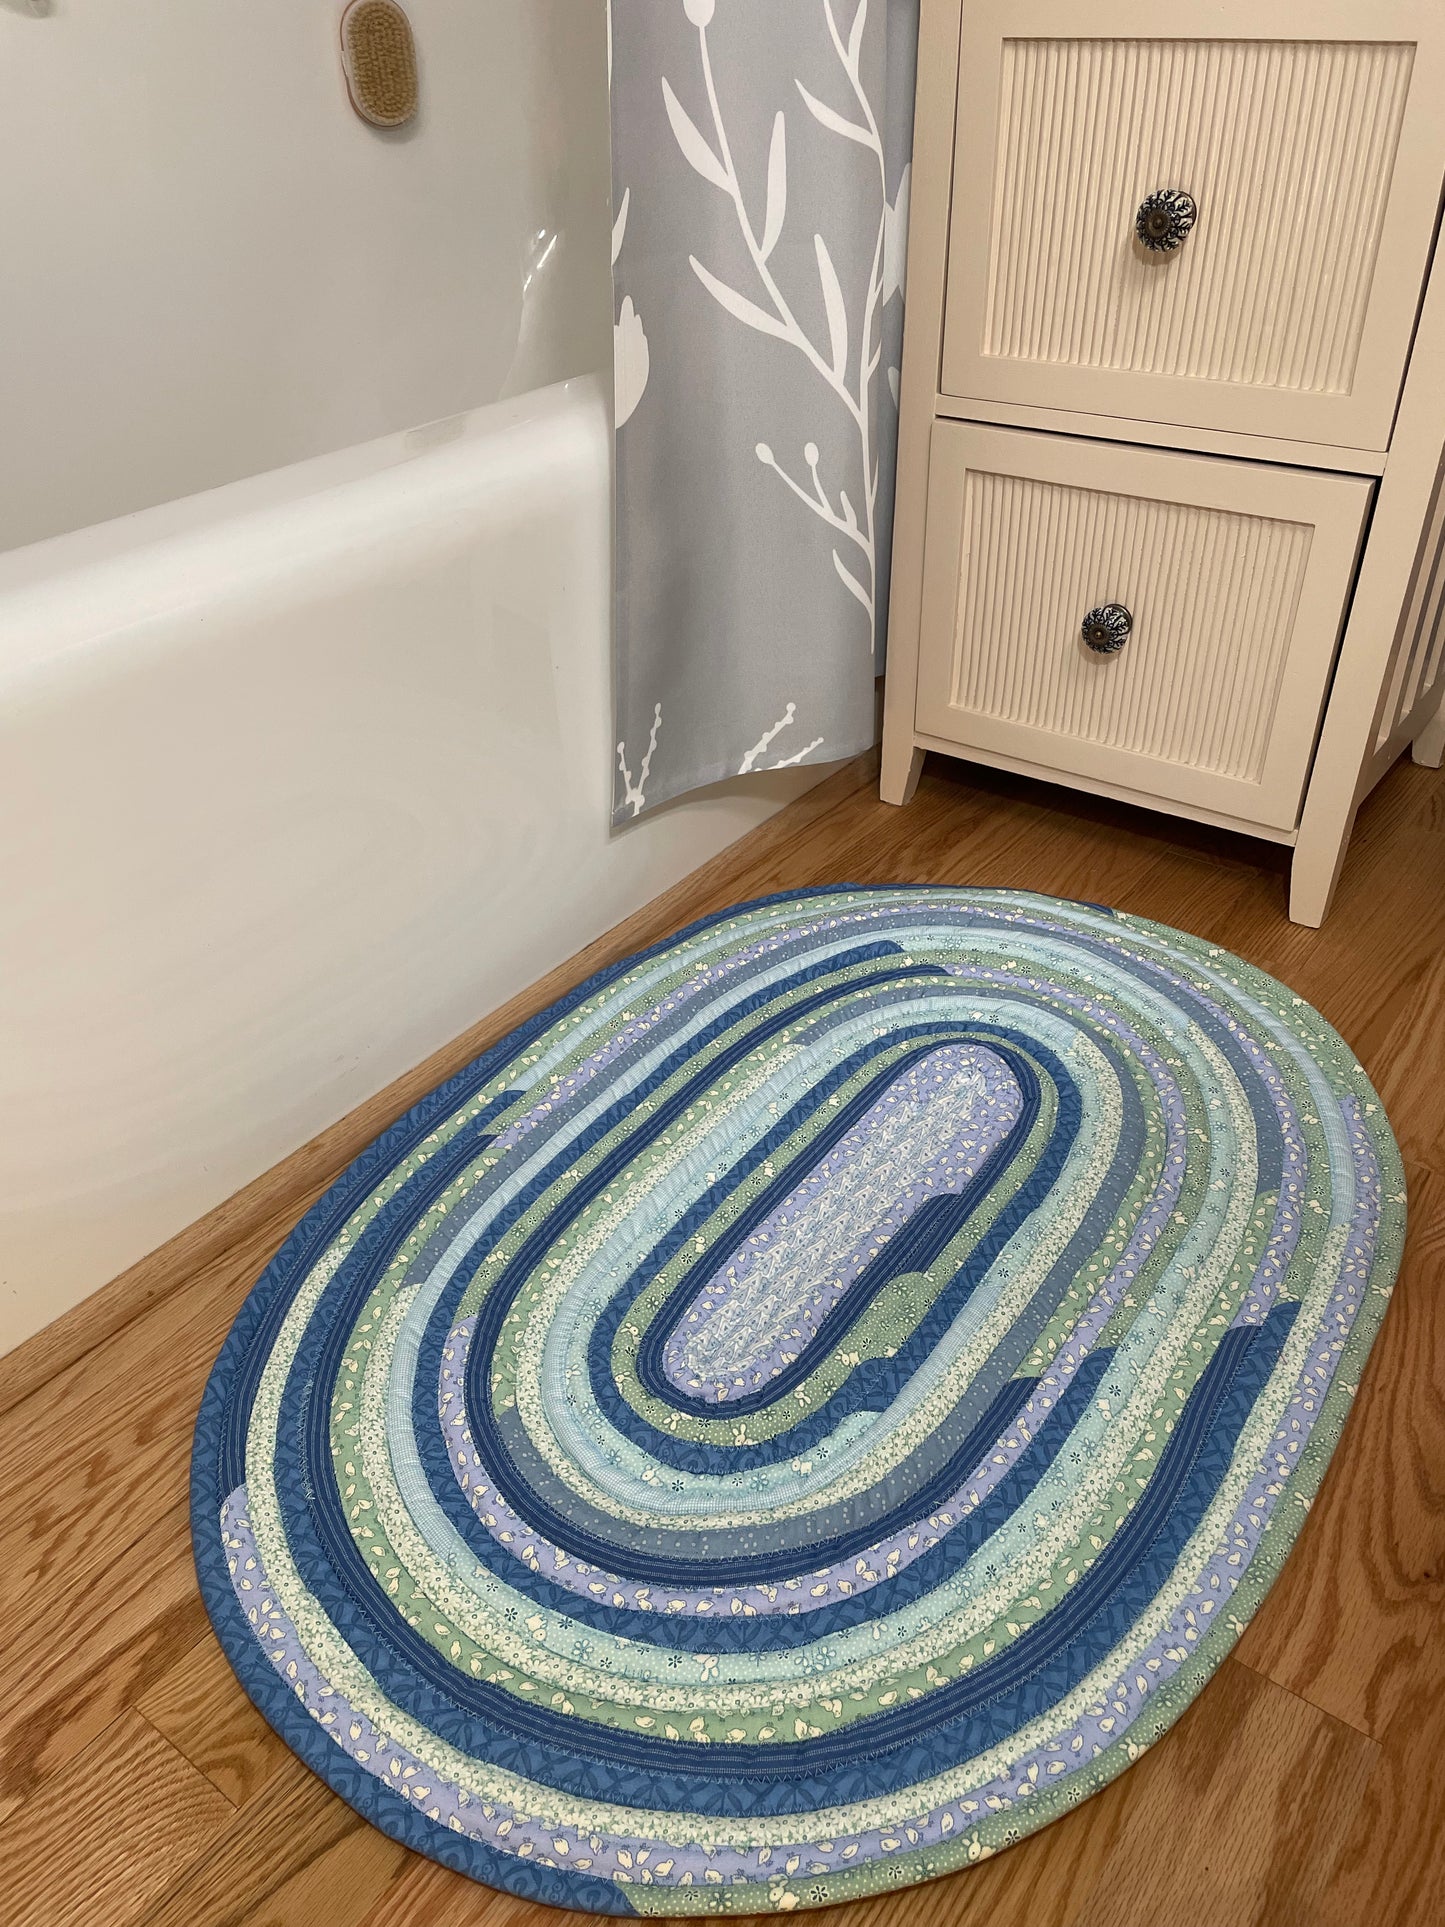 A beautiful blue and green nursery rug is the perfect way to bring life and color to any nursery. Whether in soft and subtle hues or bold and eye-catching shades, this rug will add a unique and special touch to any baby's room. Made from high-quality materials, this rug will provide warmth and comfort to both baby and parents. The easy to clean surface makes this rug a great choice for both parents and children. Enjoy the perfect combination of style and function with the blue and green nursery rug.